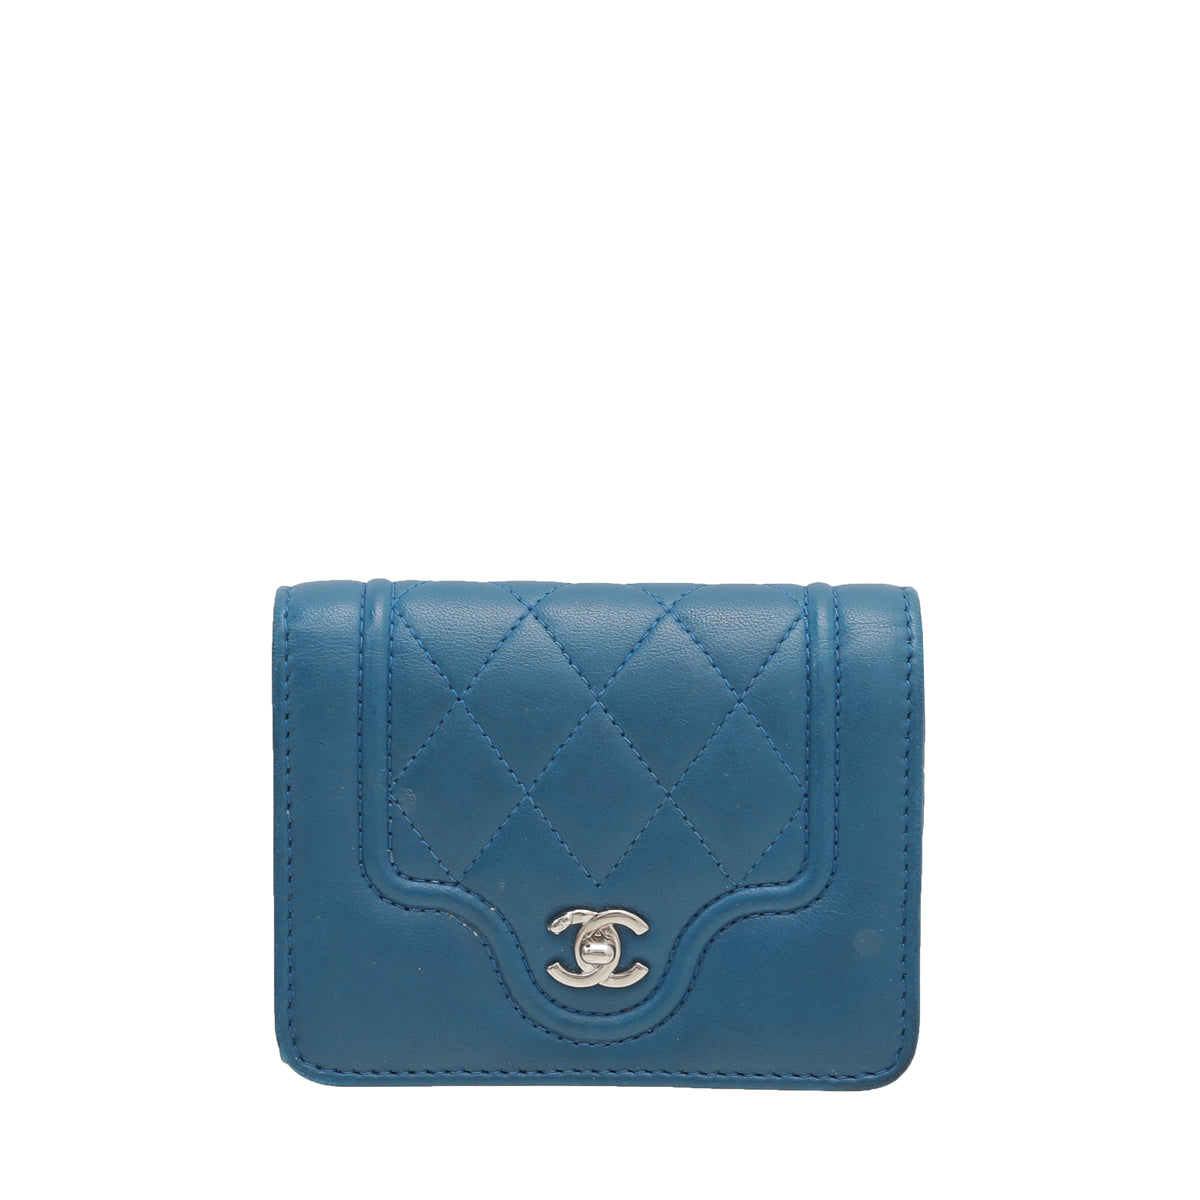 Chanel Blue CC Compact Wallet